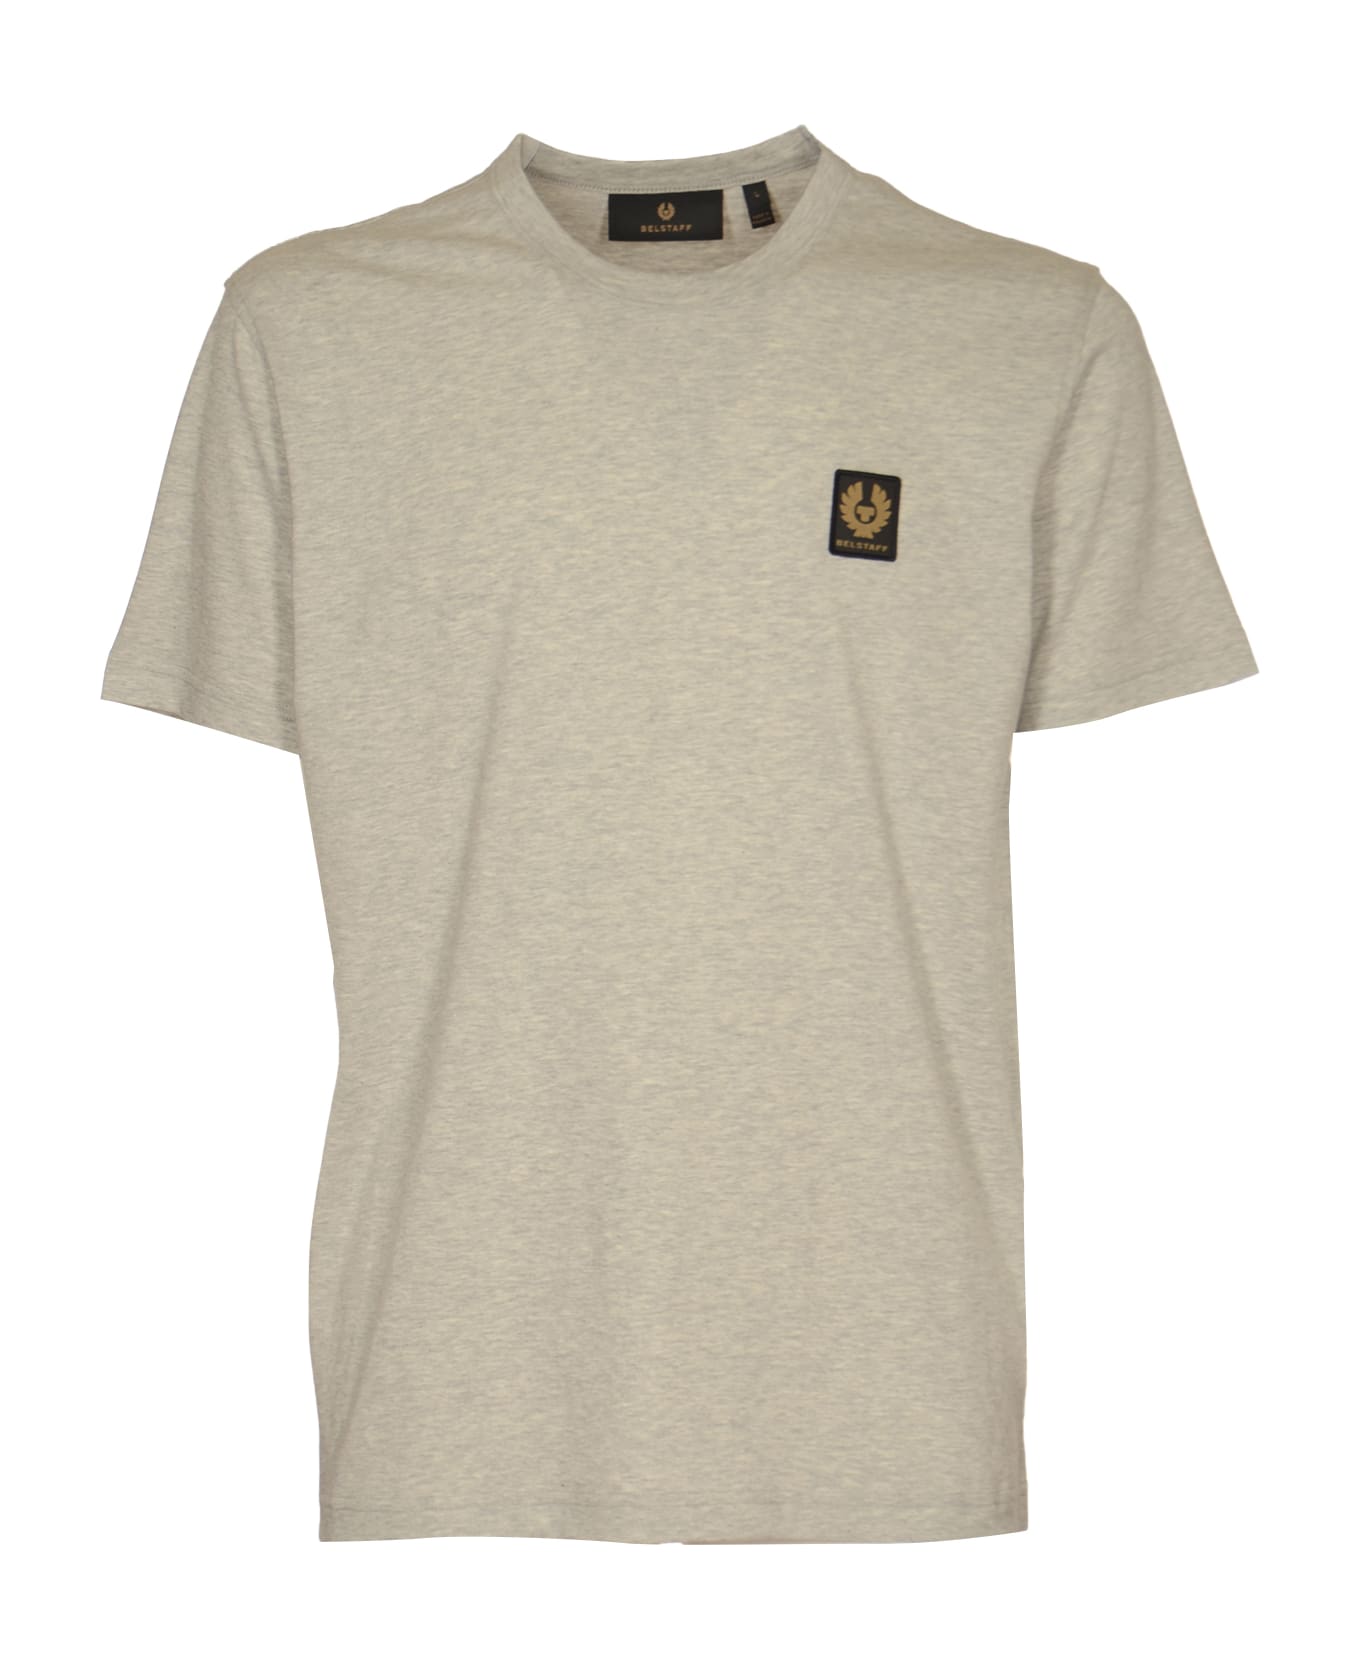 Belstaff Logo Patched Round Neck Plain T-shirt - Old Silver Heather